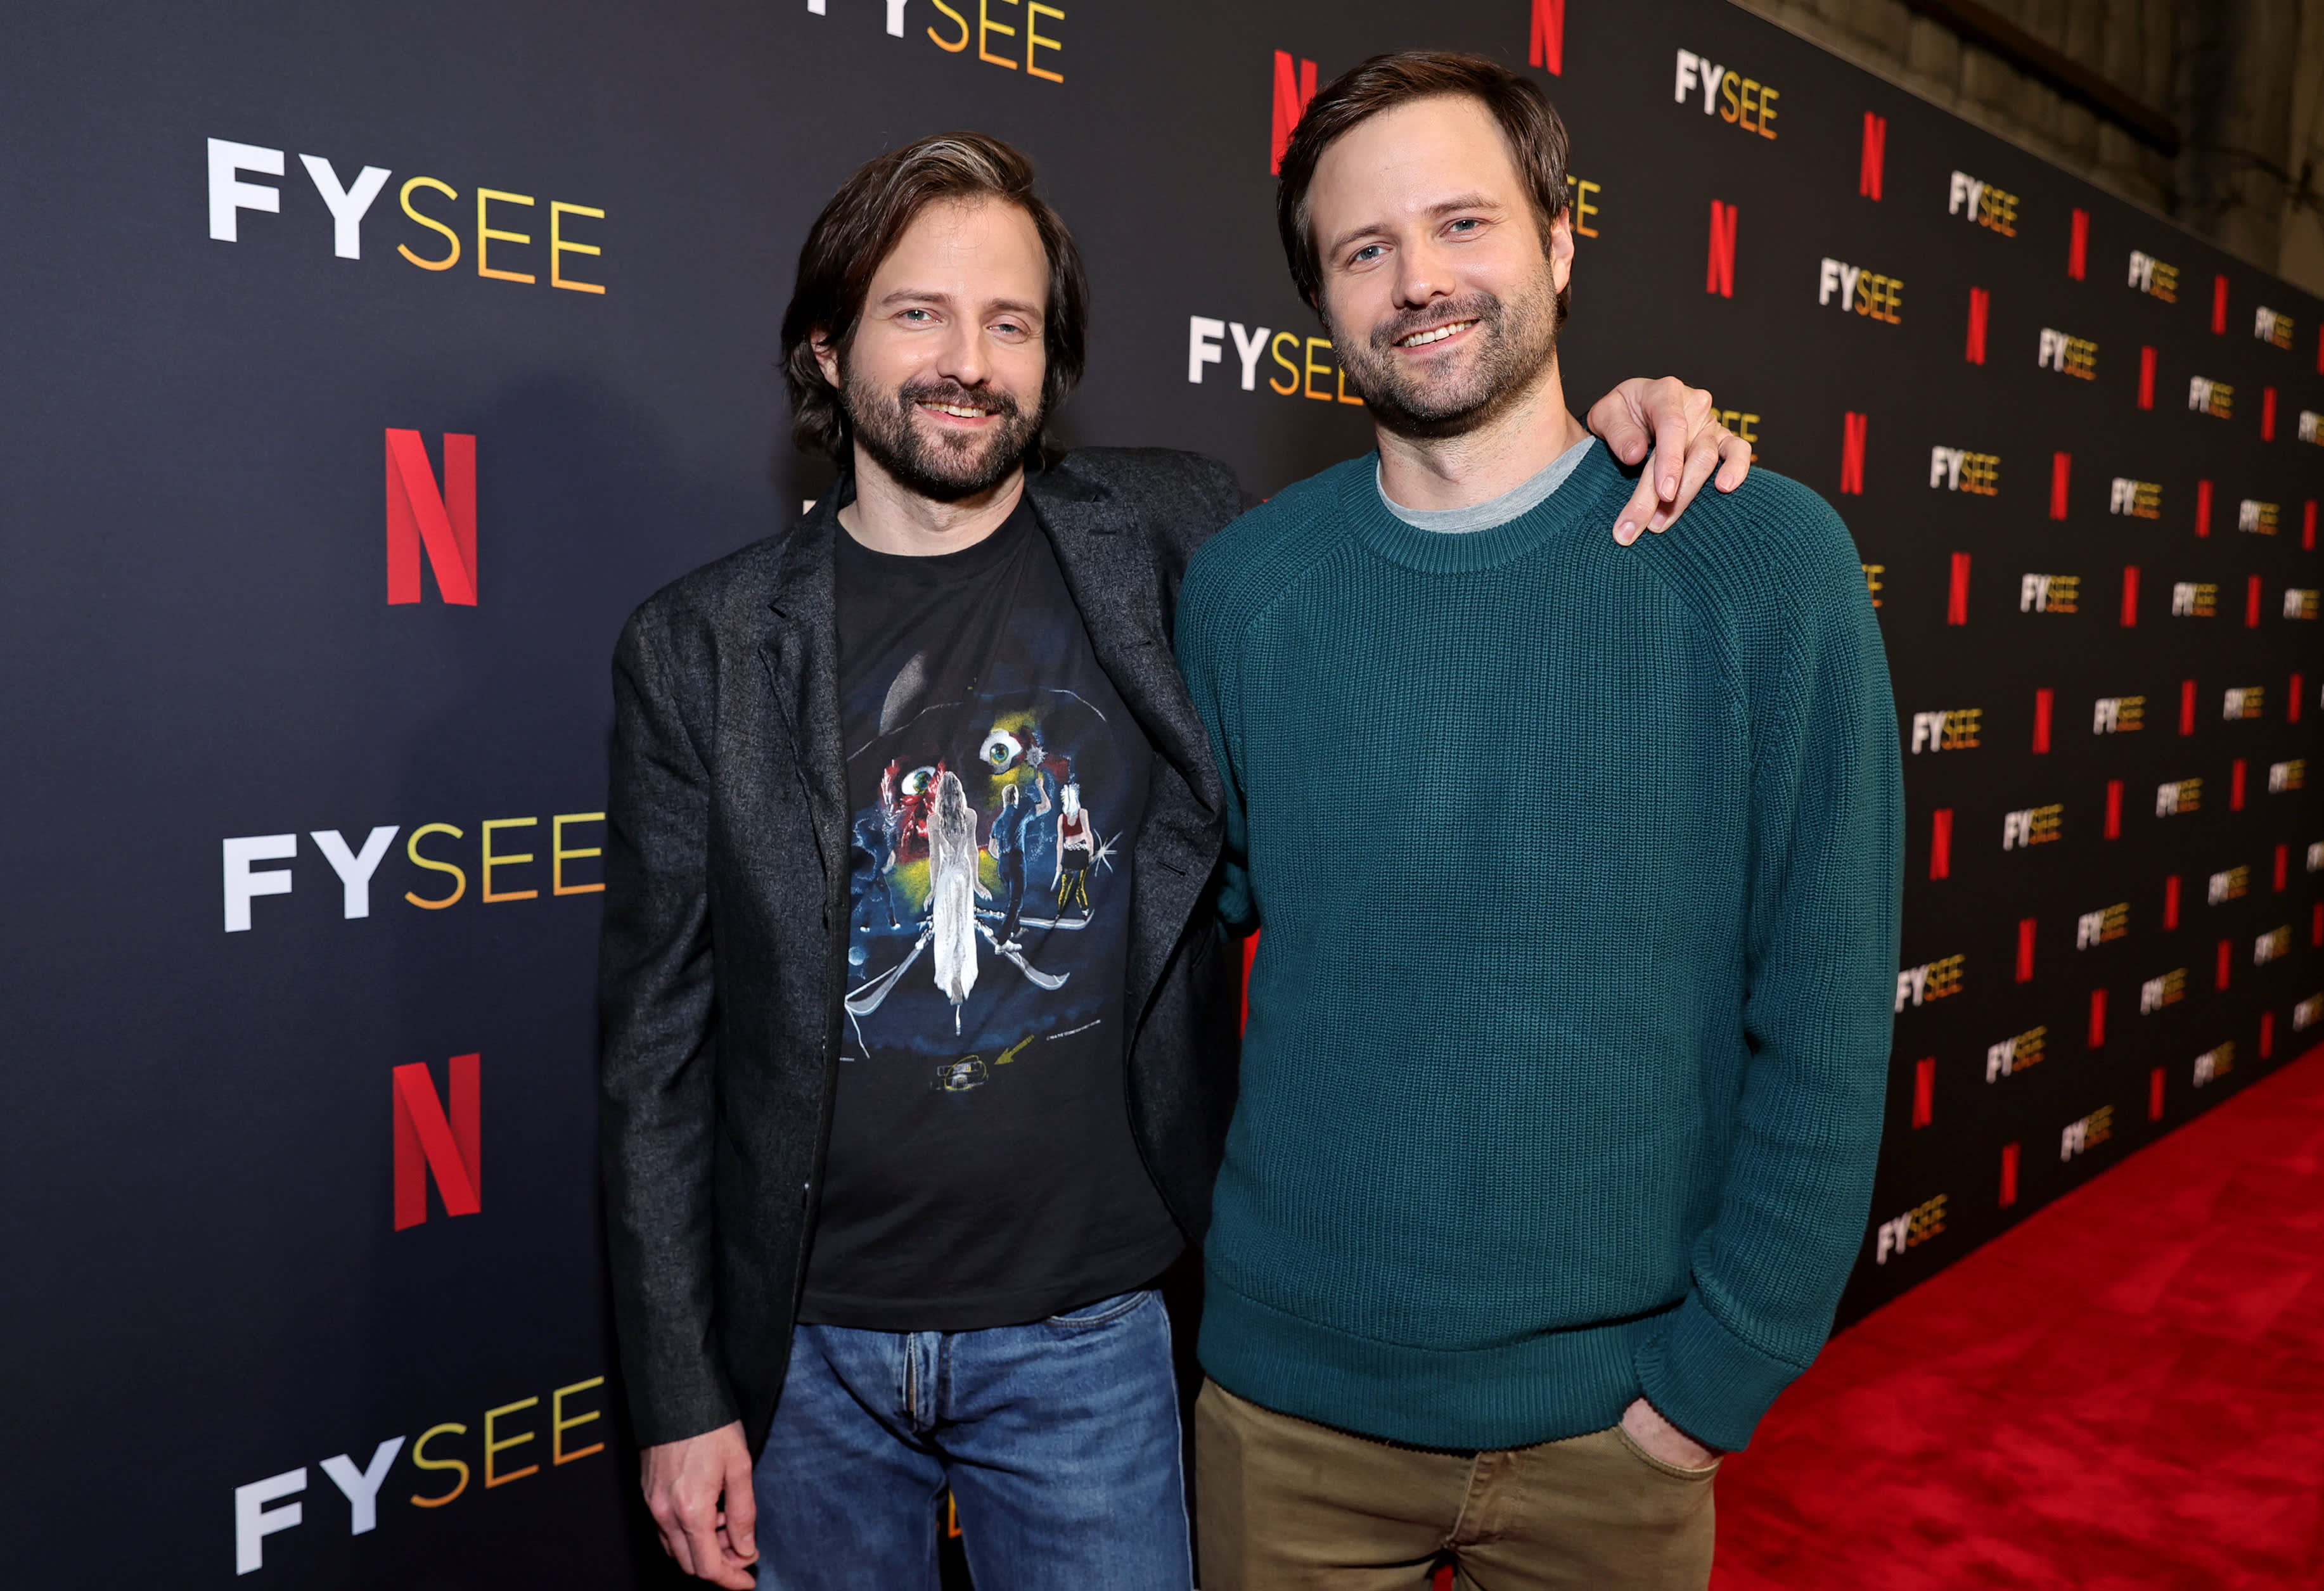 Post-Stranger Things, Duffer Brothers will create a Death Note